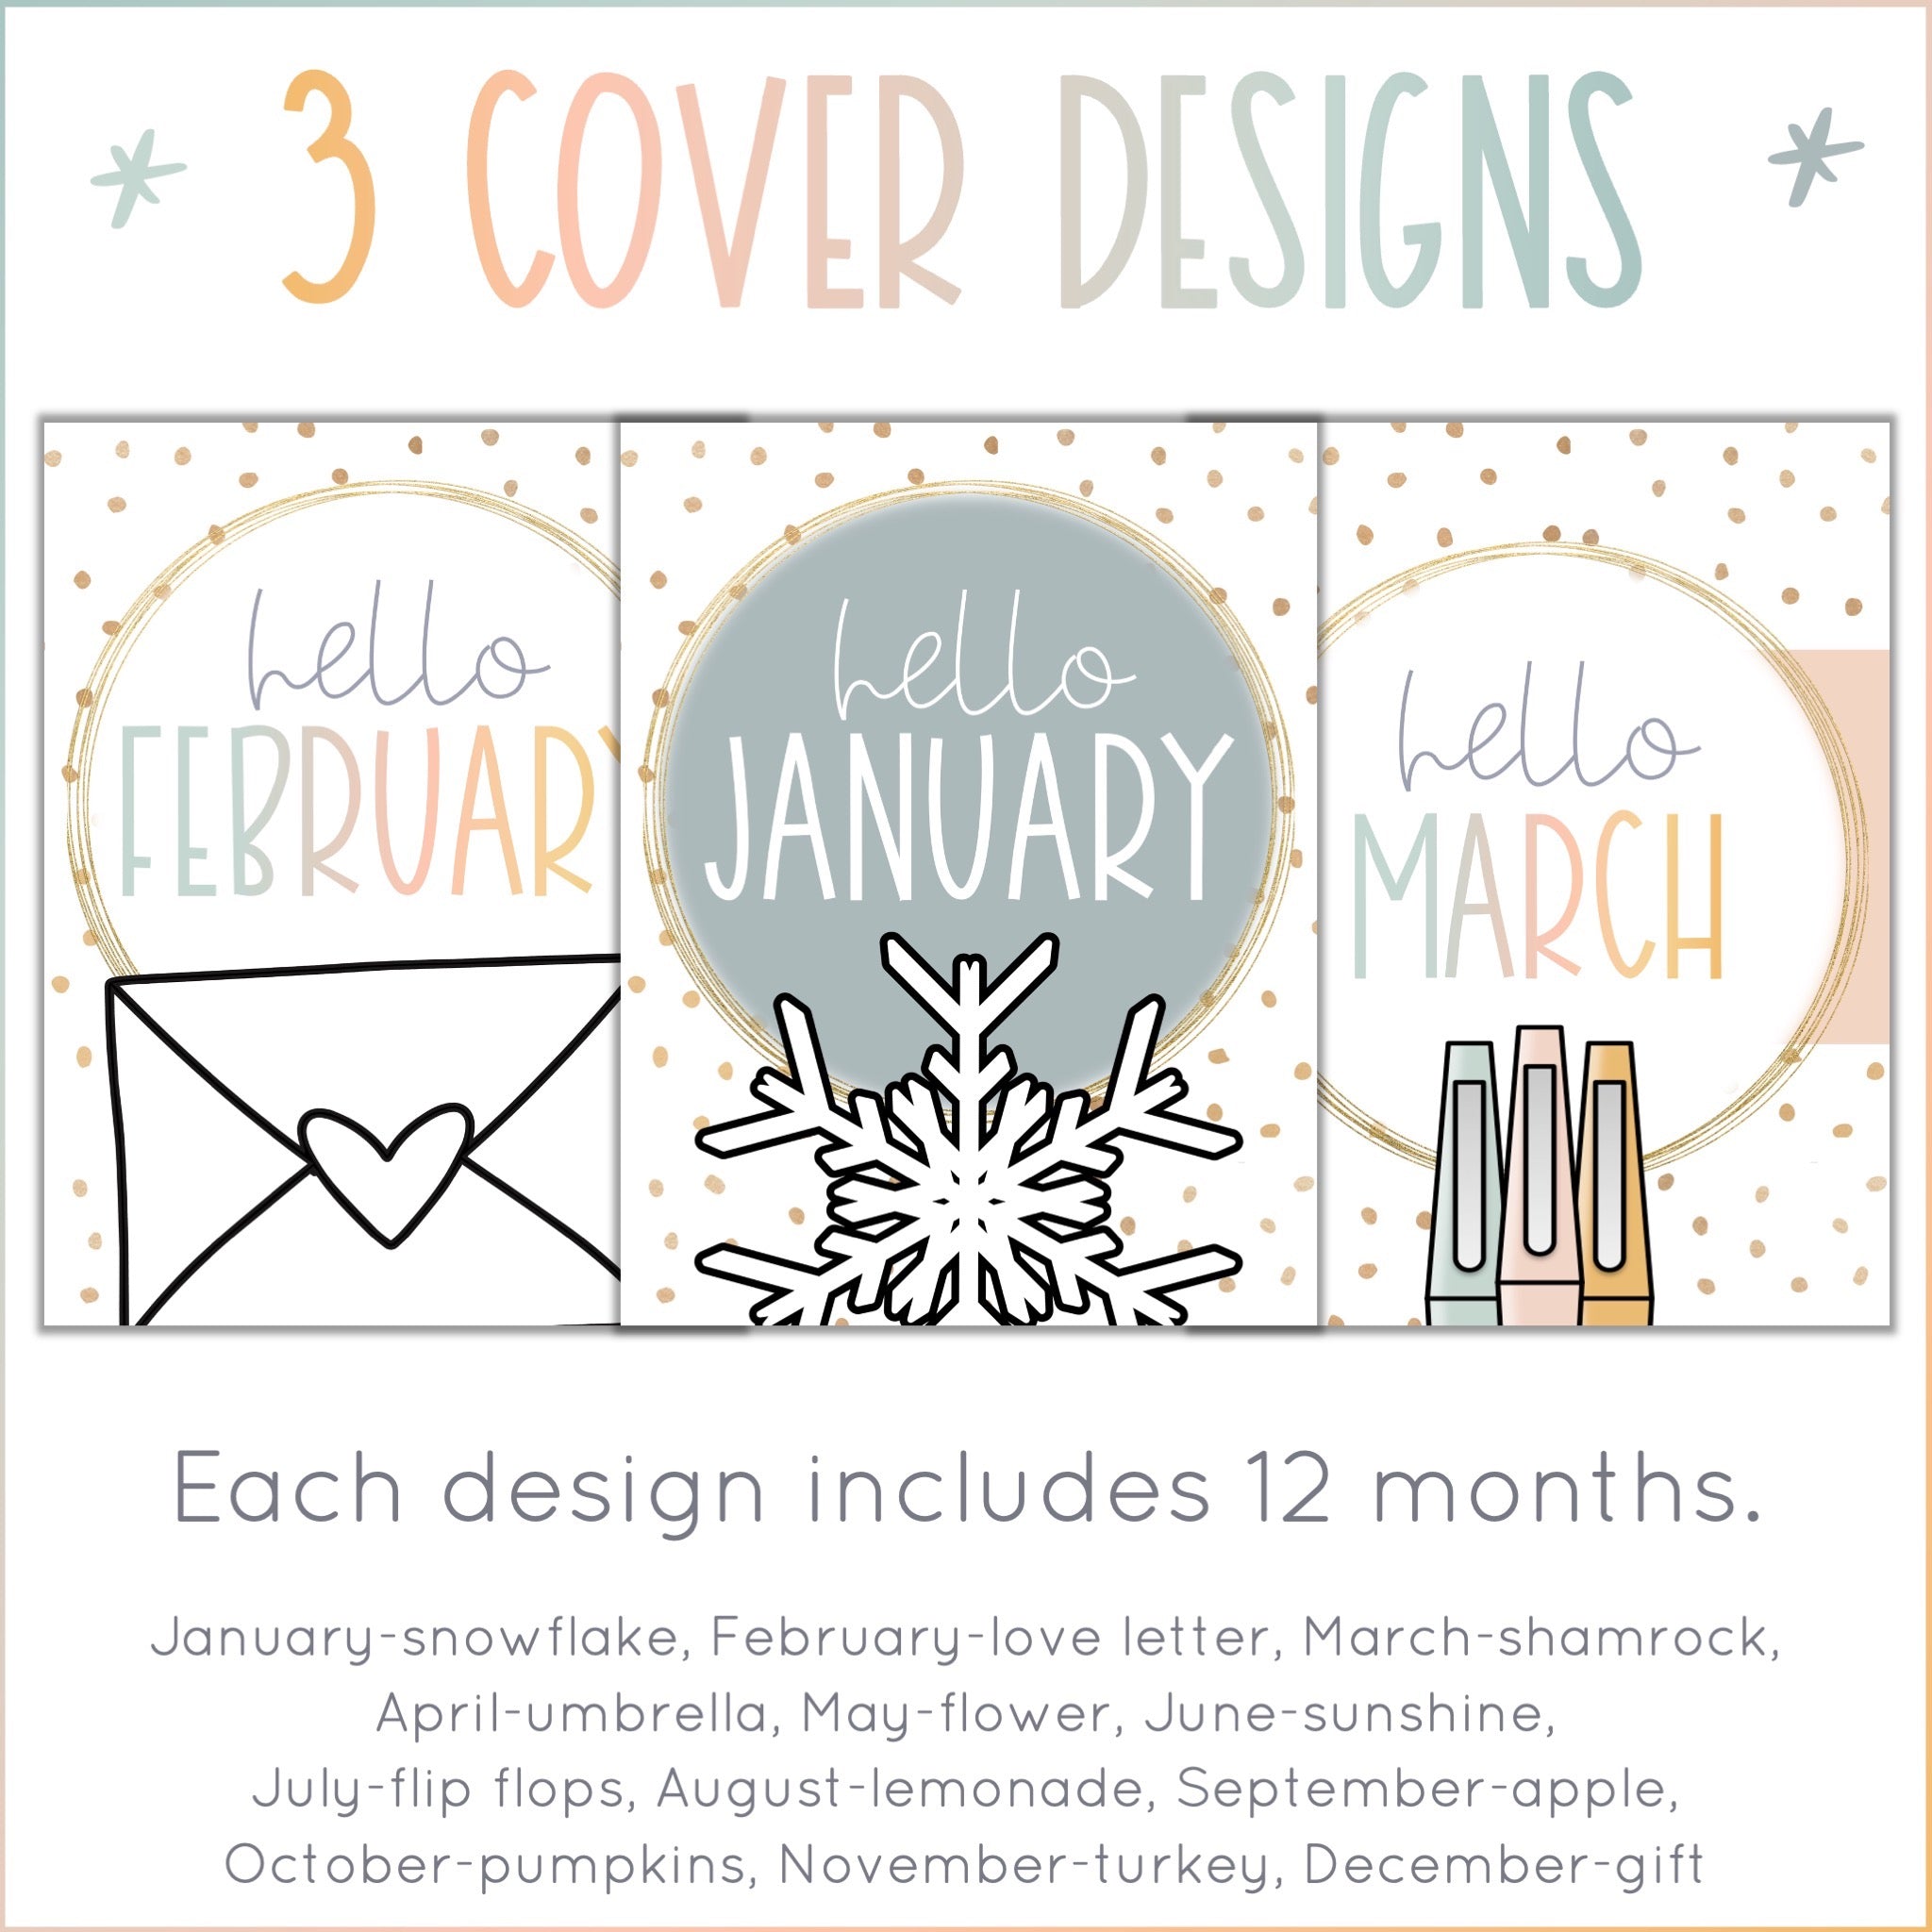 Hello Calm Monthly Binder Covers